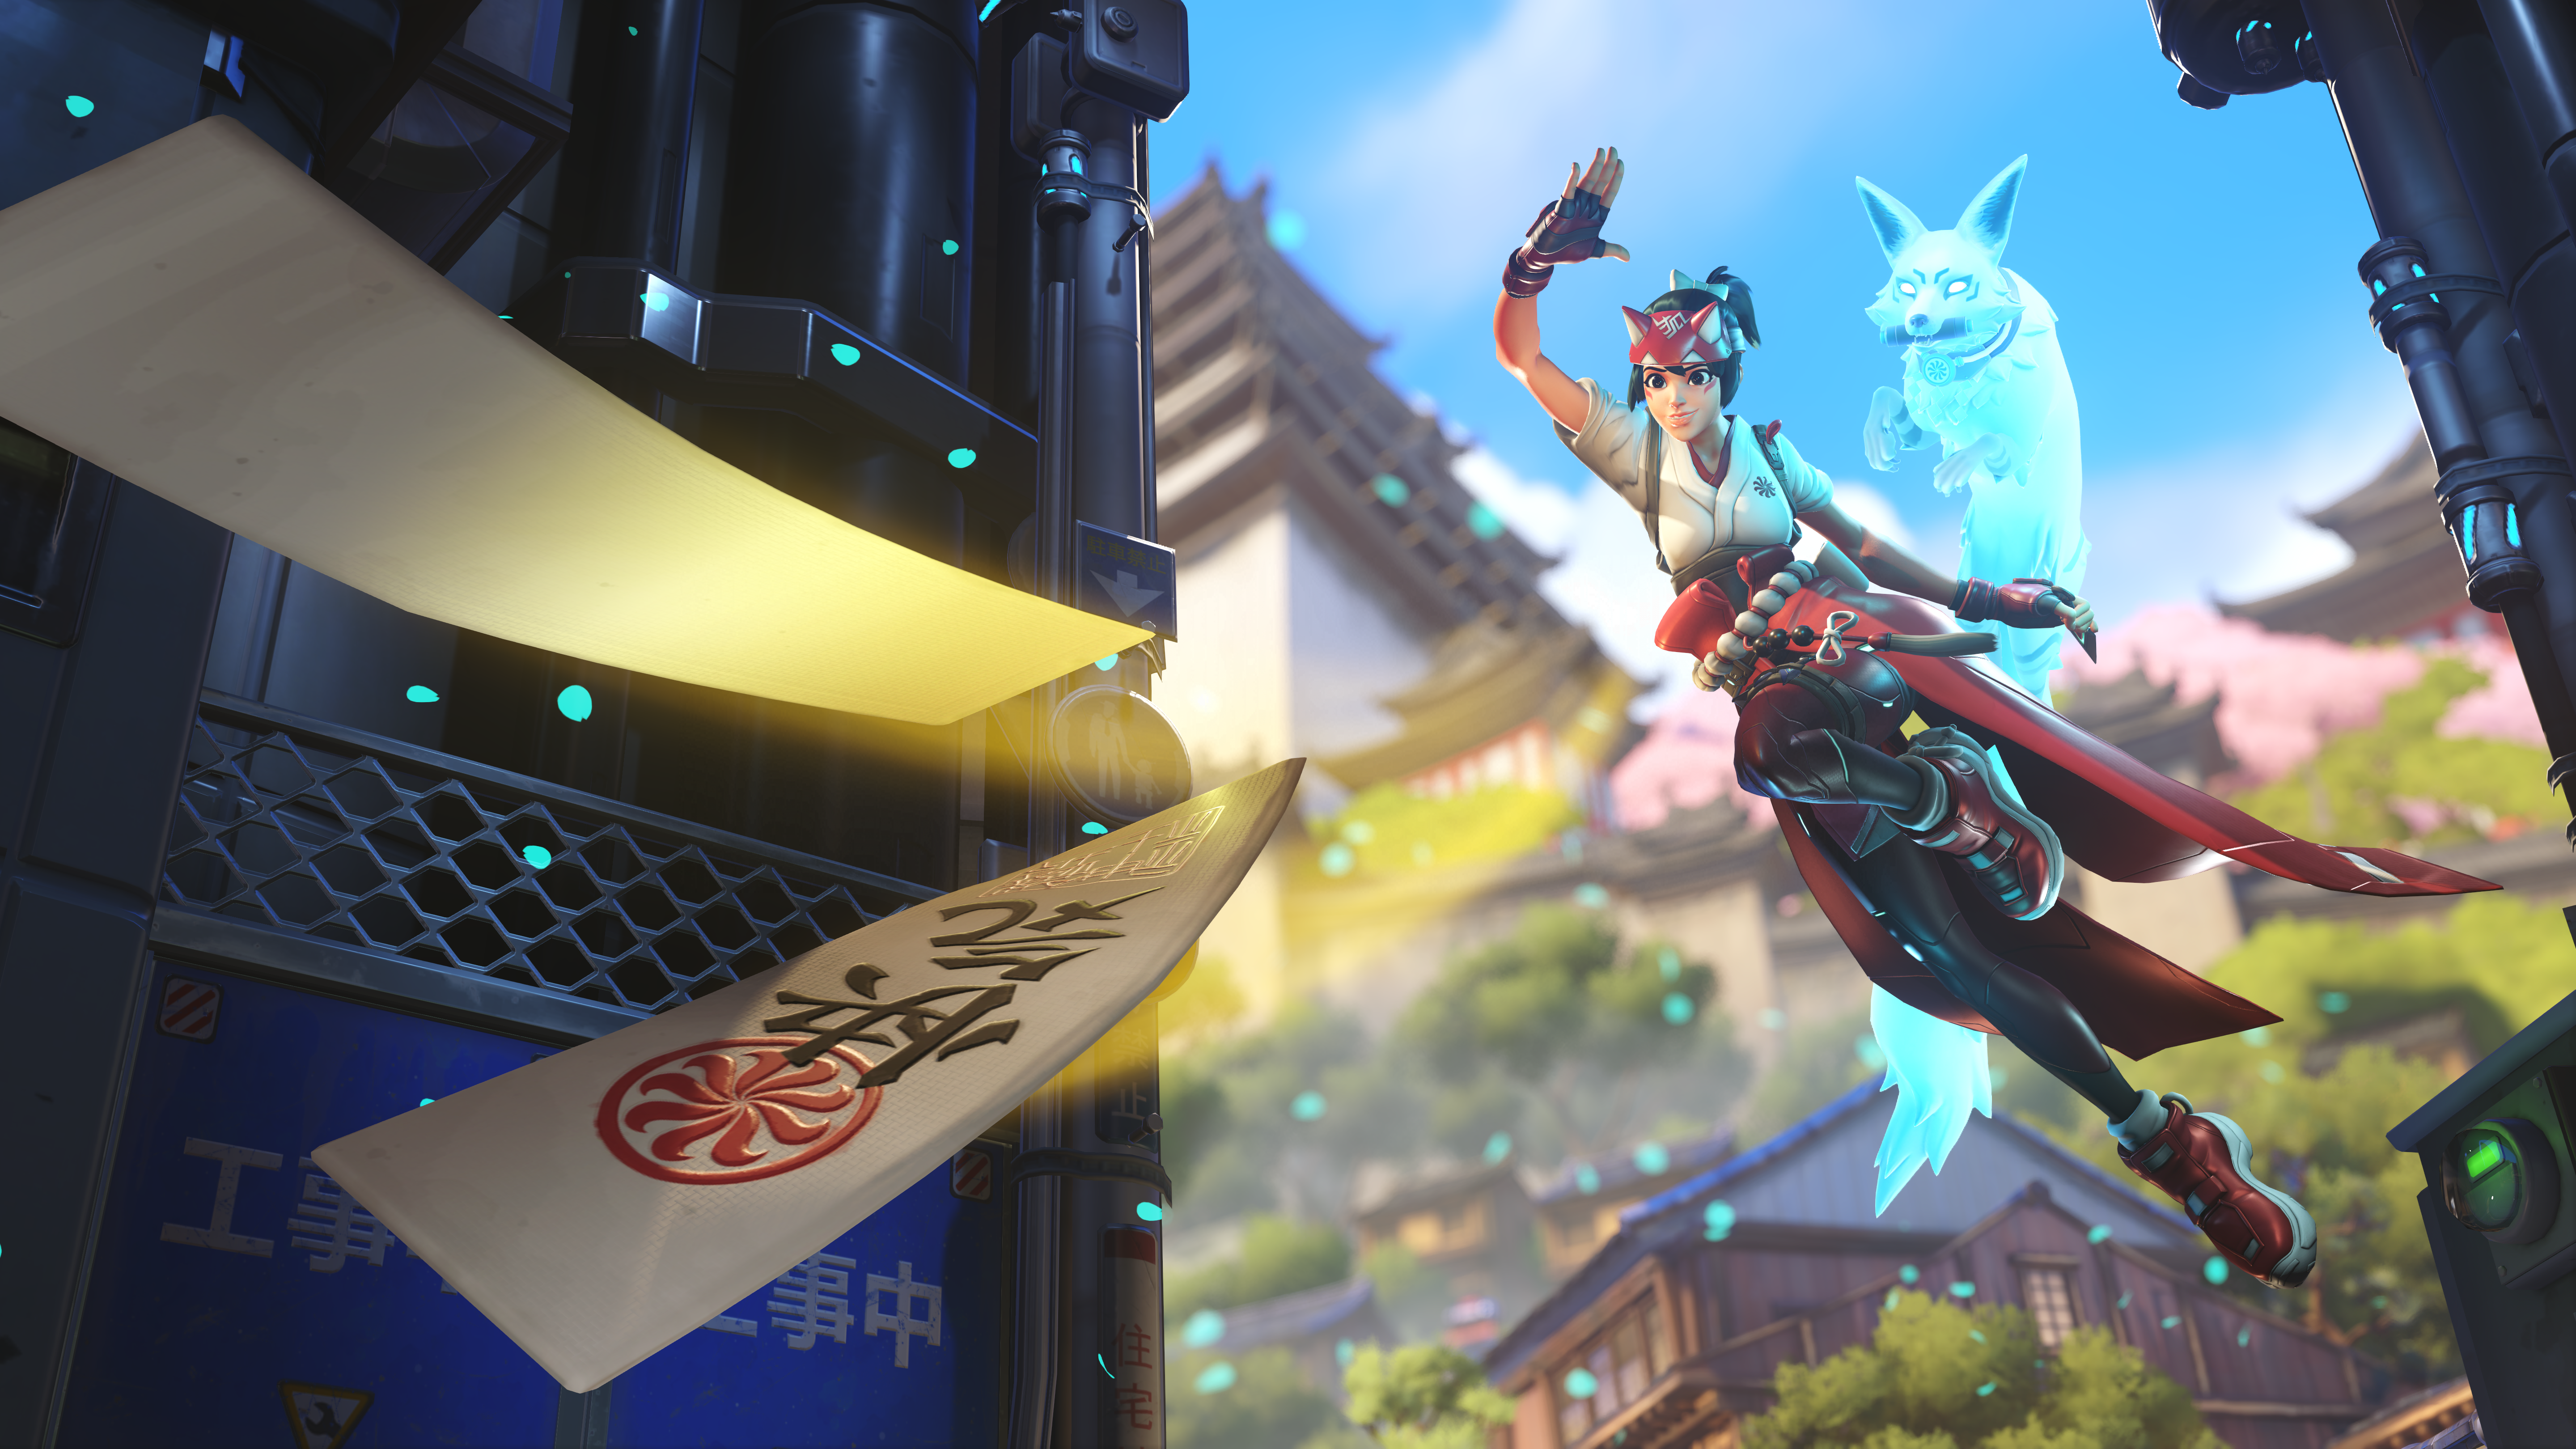 General 5760x3240 Overwatch Kiriko (Overwatch) video games video game girls fox video game characters screen shot floating particles green hair Blizzard Entertainment asian clothing Spirit Japan Asian architecture gloves fingerless gloves smiling jumping